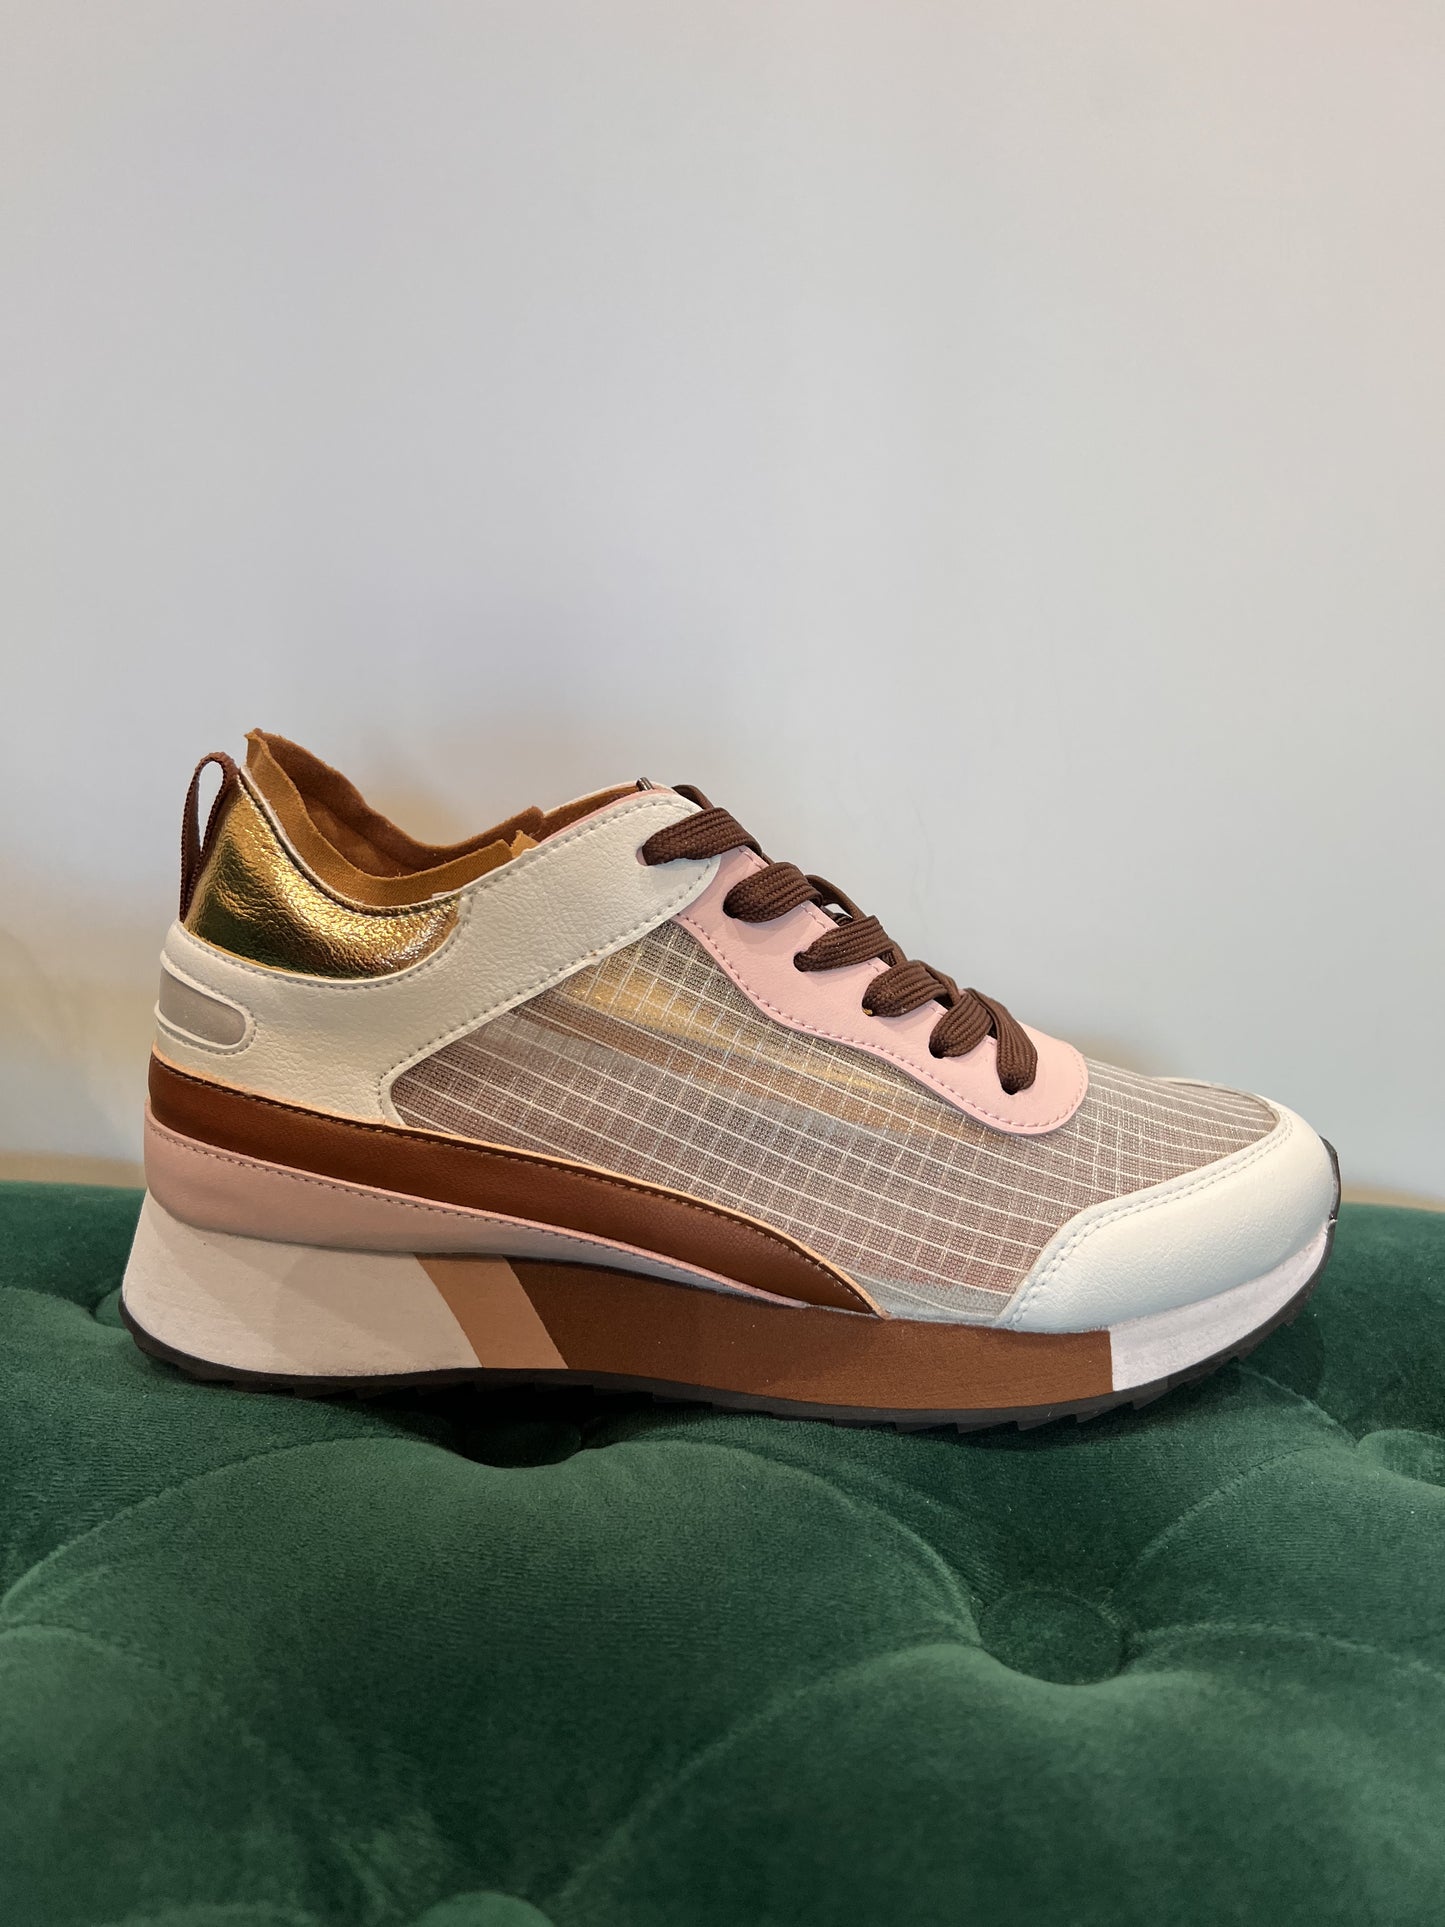 Sneakers pelle cacao bianco rosa